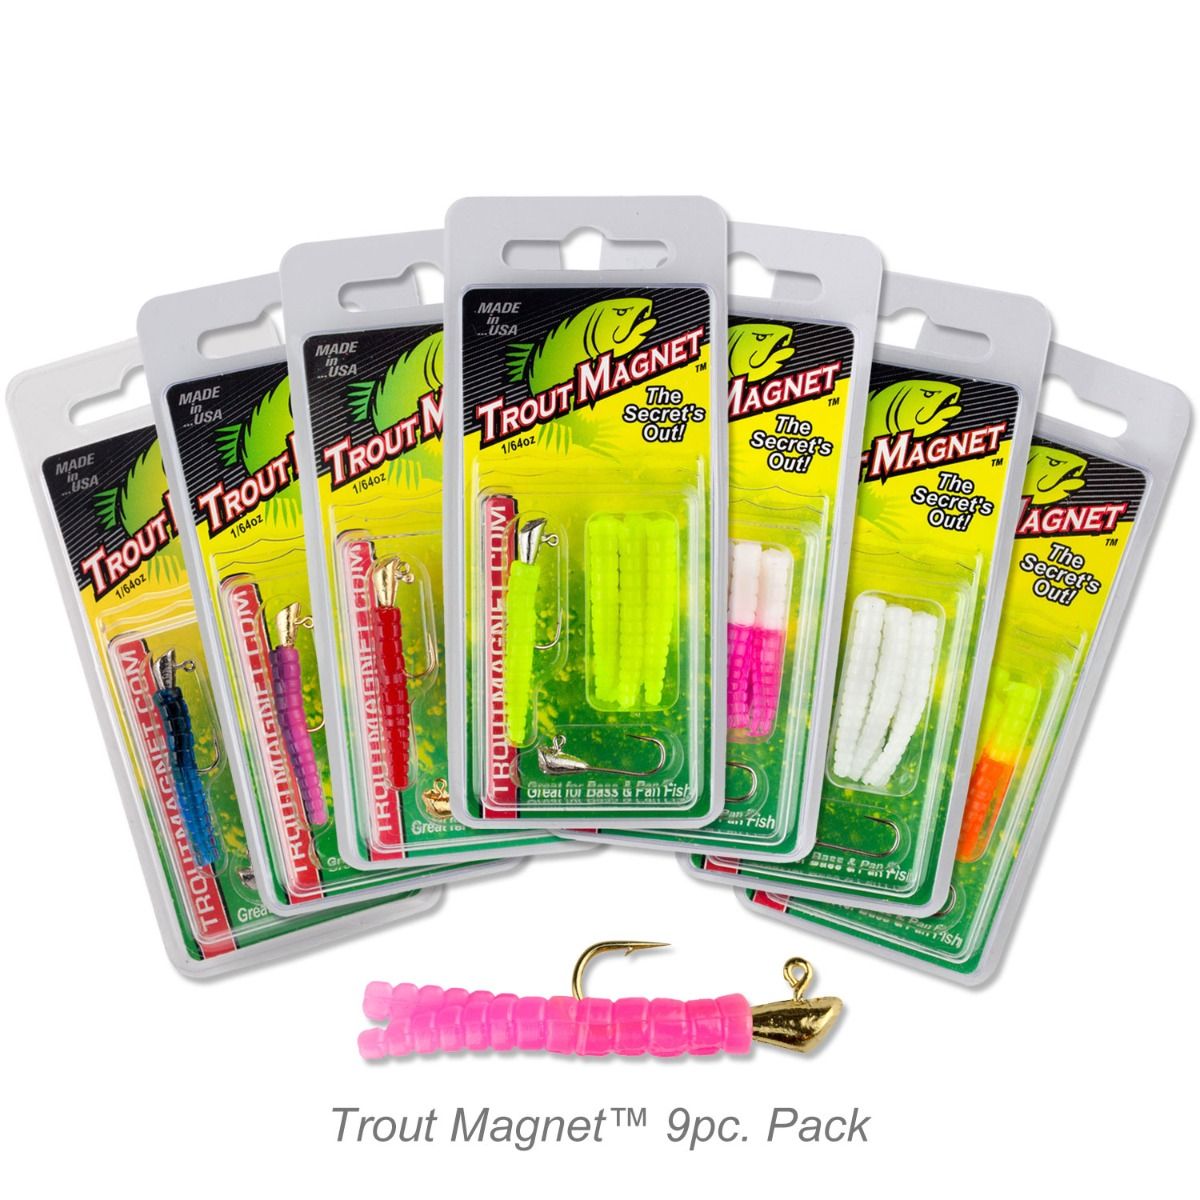 Leland Crappie Magnet™ 15 Piece Soft Body Lures Choose From 40